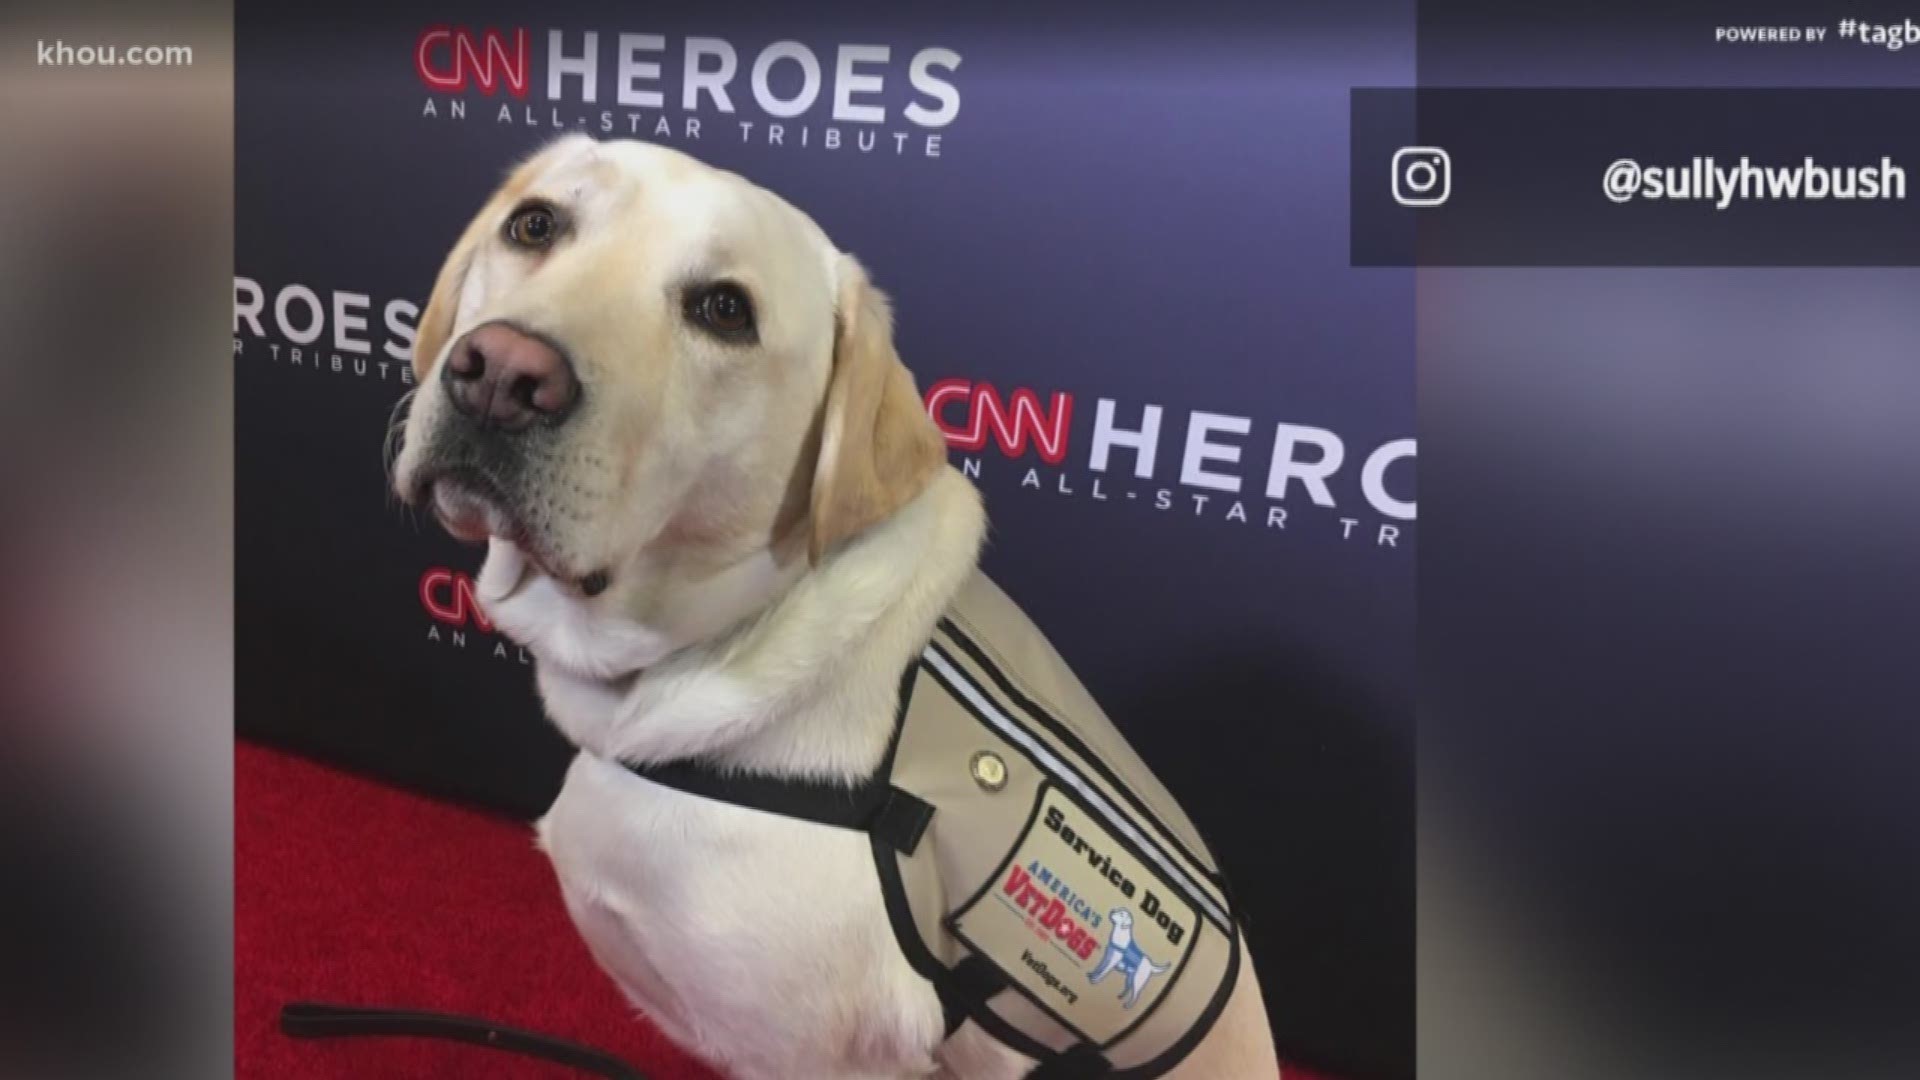 Sully Bush honored George H.W. Bush one more time during the CNN Hero Awards Sunday night. CNN anchor Anderson Cooper welcomed Sully on stage and thanked him for his service to the former president.